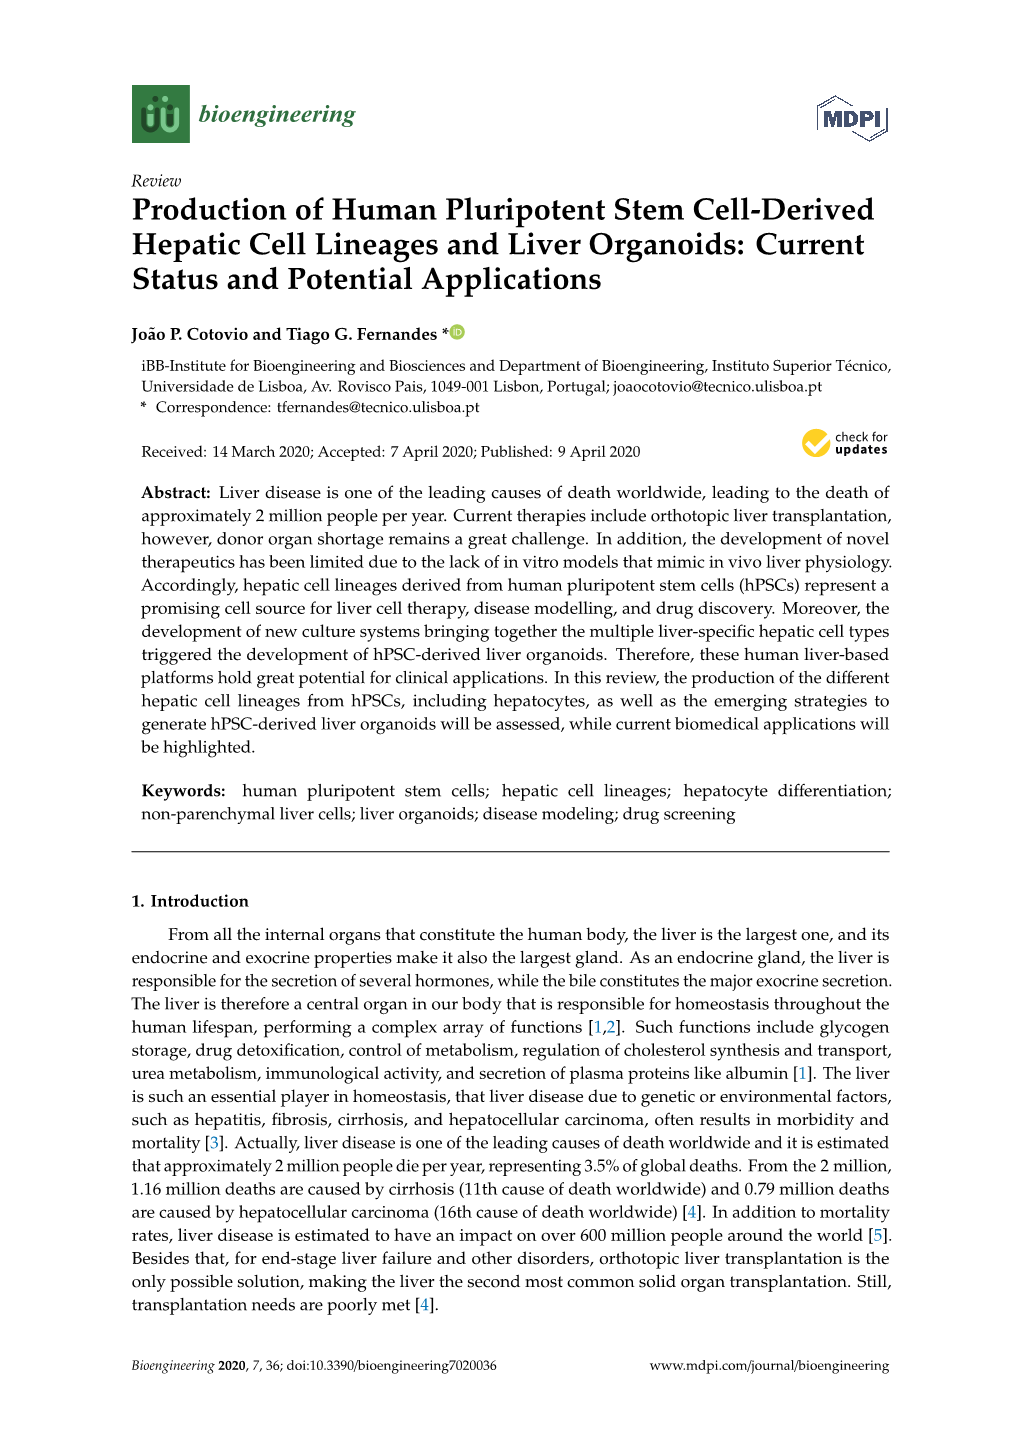 Production of Human Pluripotent Stem Cell-Derived Hepatic Cell Lineages and Liver Organoids: Current Status and Potential Applications